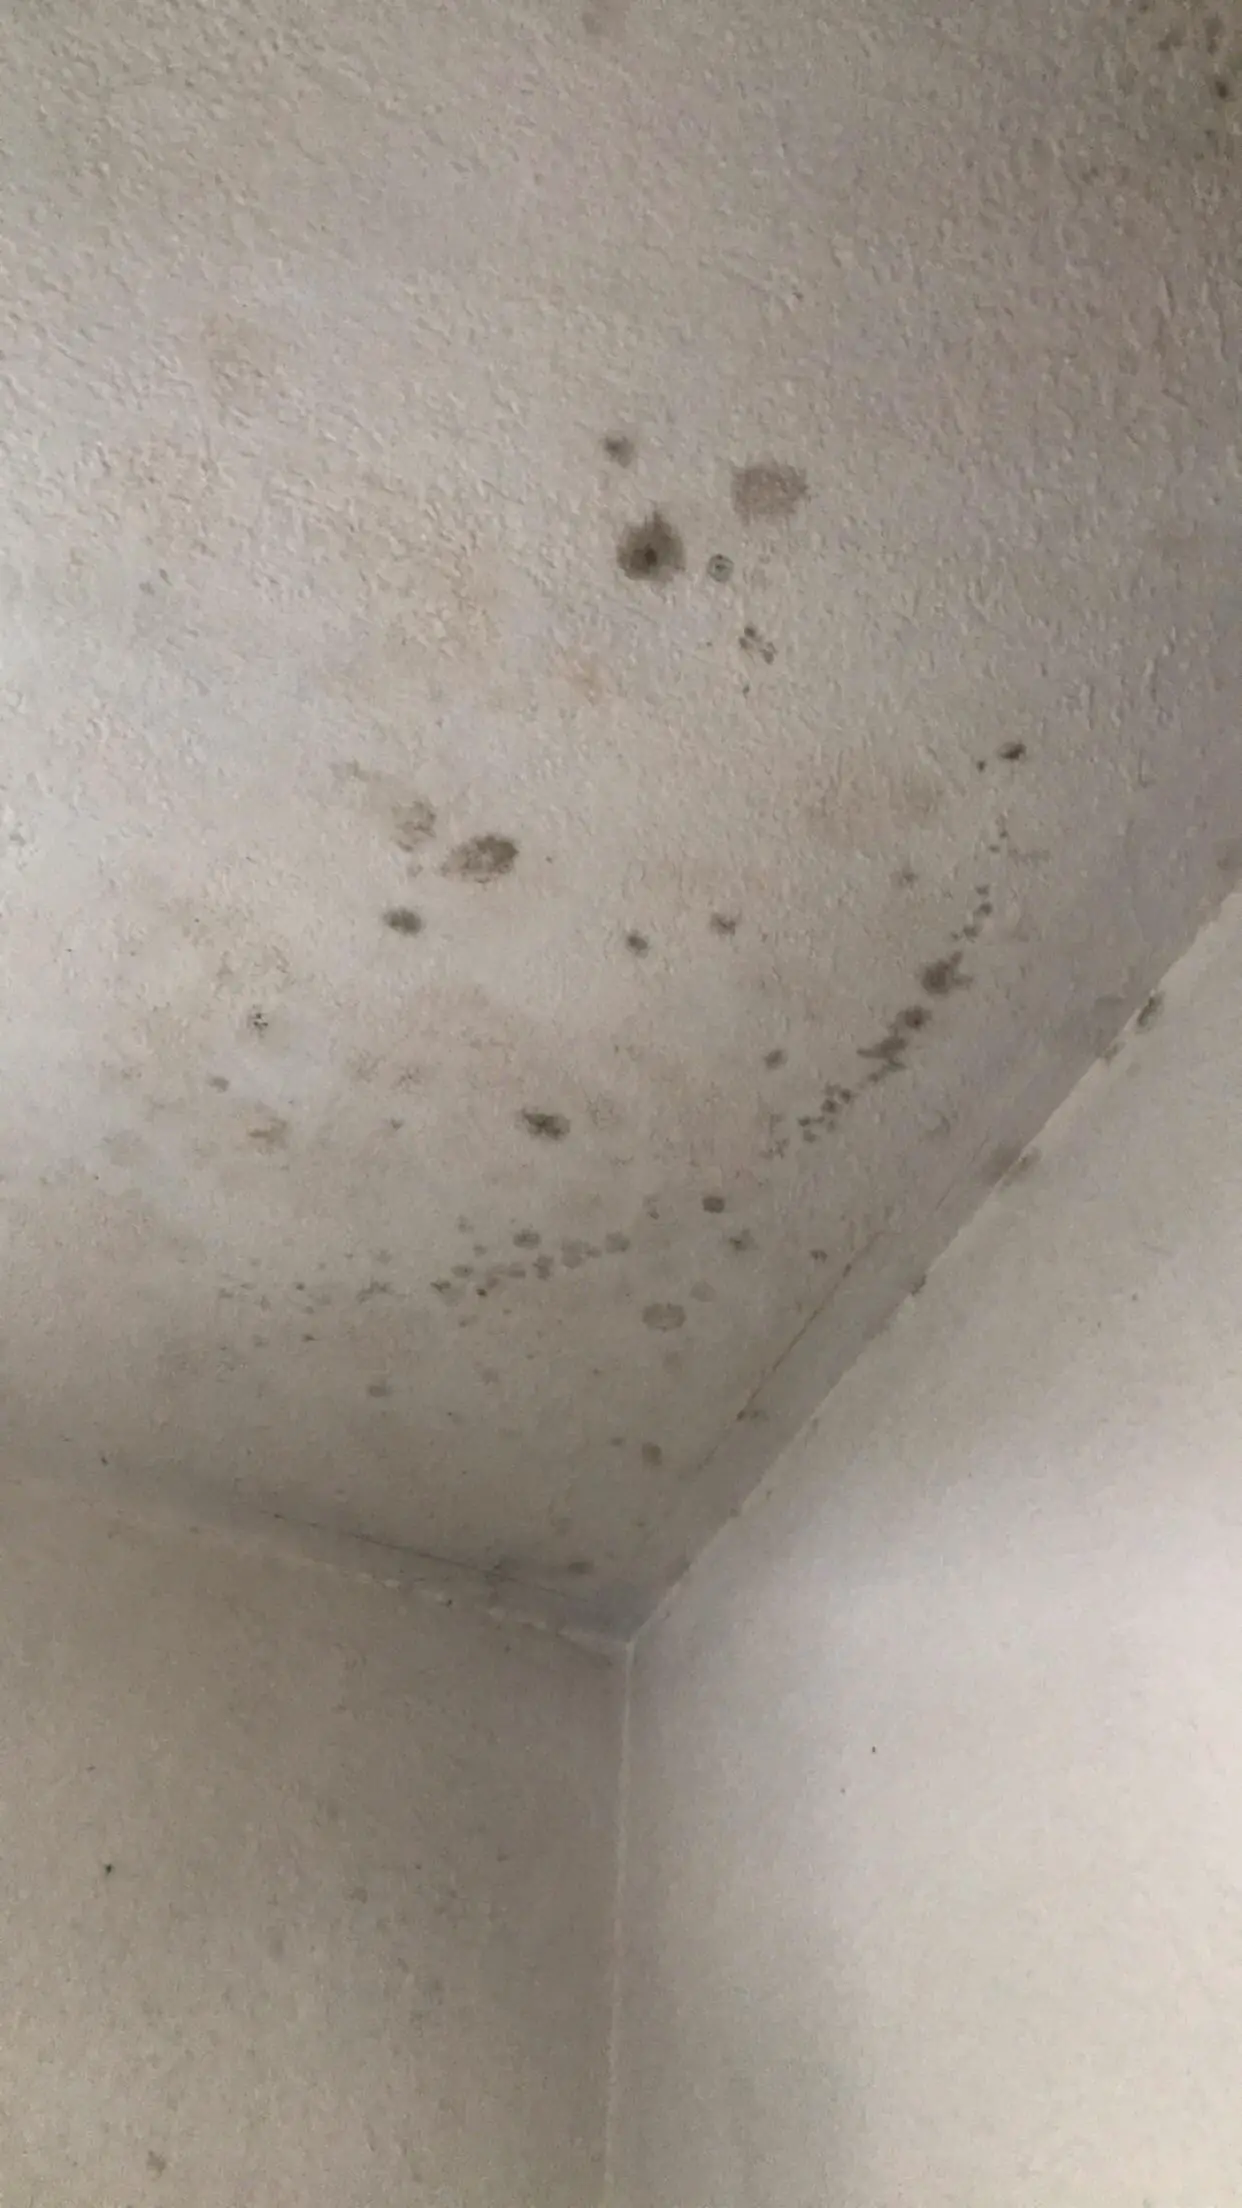 How To Get Rid Of Mold Spots On Bathroom Ceiling ...